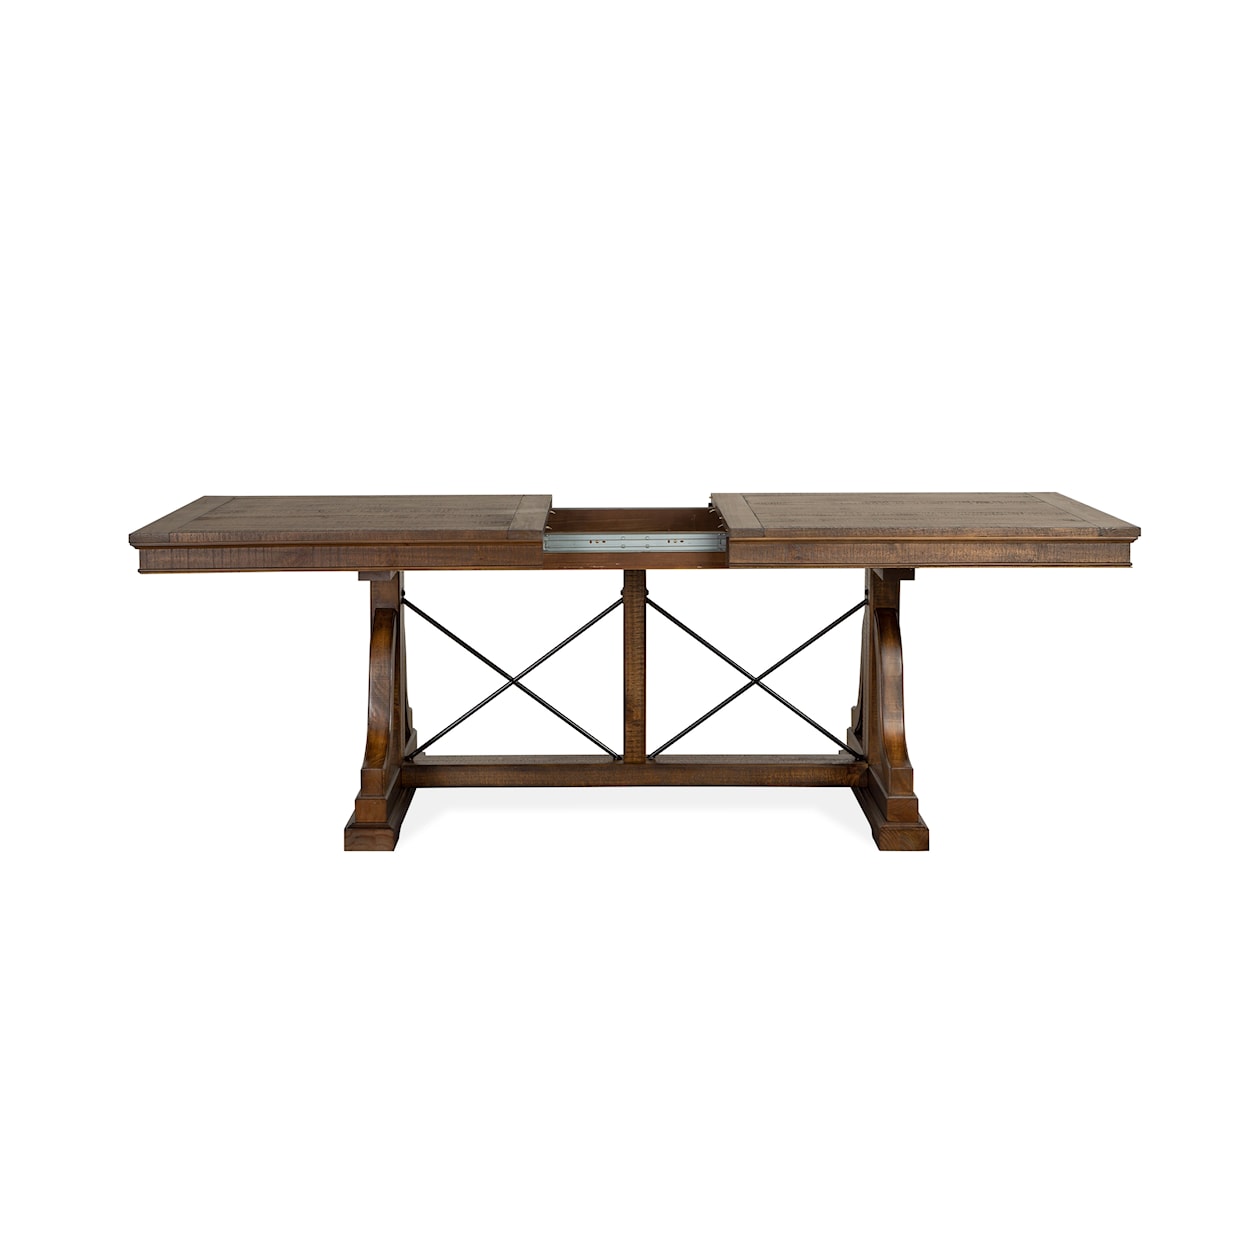 Magnussen Home Bay Creek Dining Dining Trestle Table